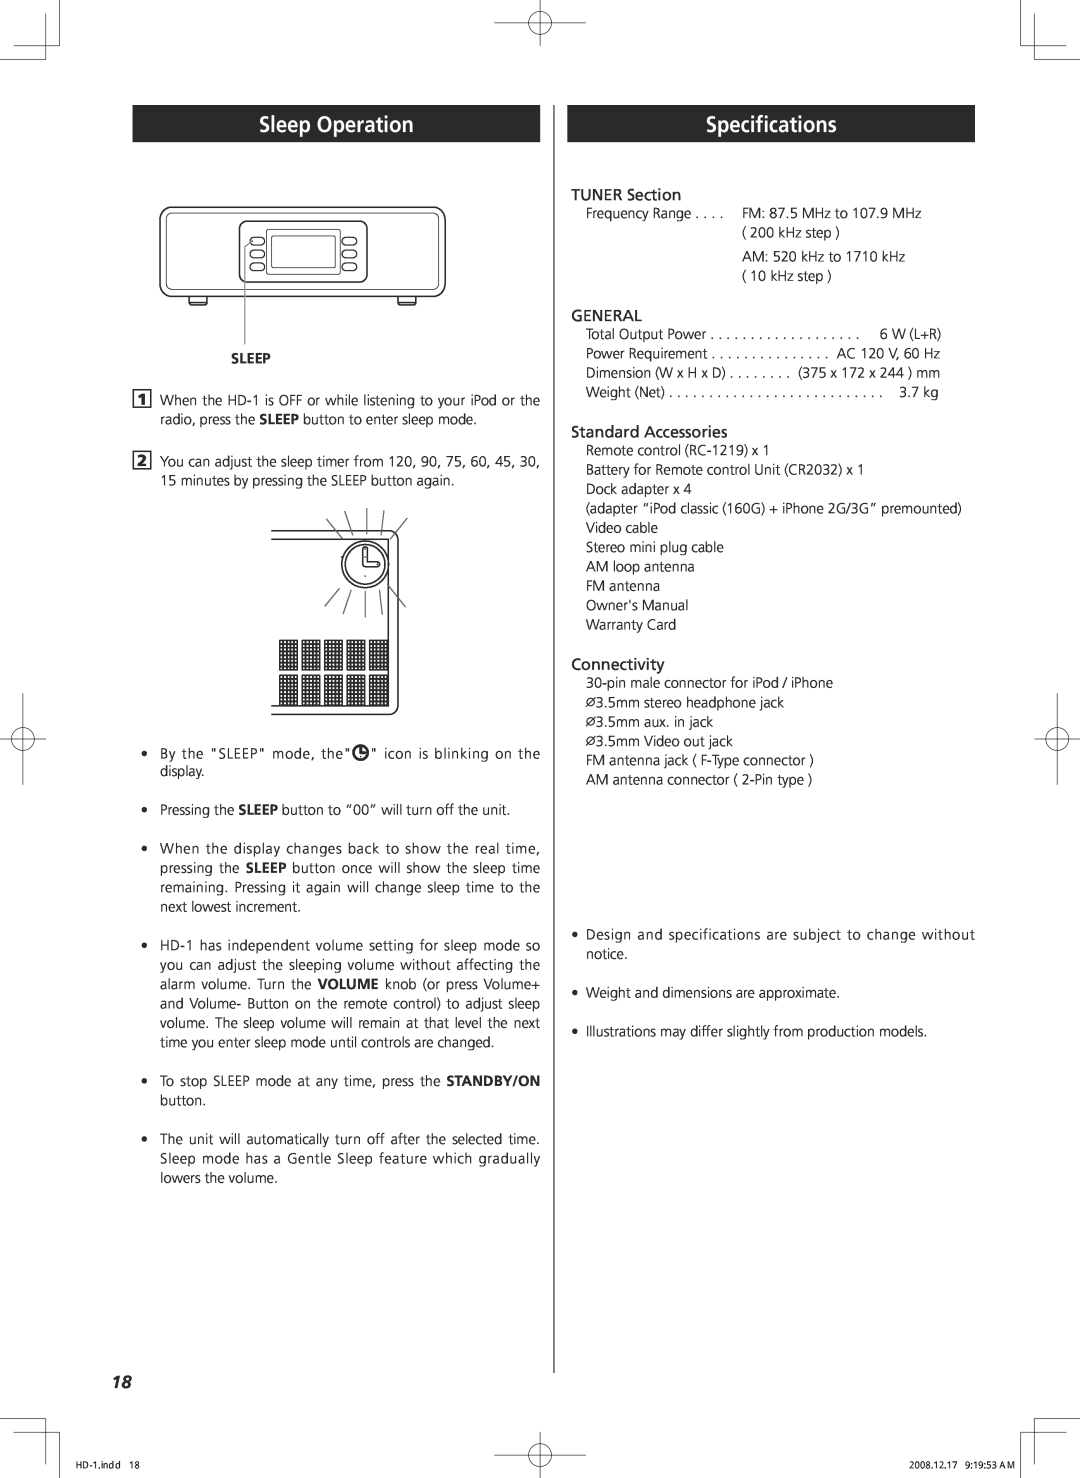 Teac HD-1 owner manual Sleep Operation, Specifications, TUNER Section, General, Standard Accessories, Connectivity 